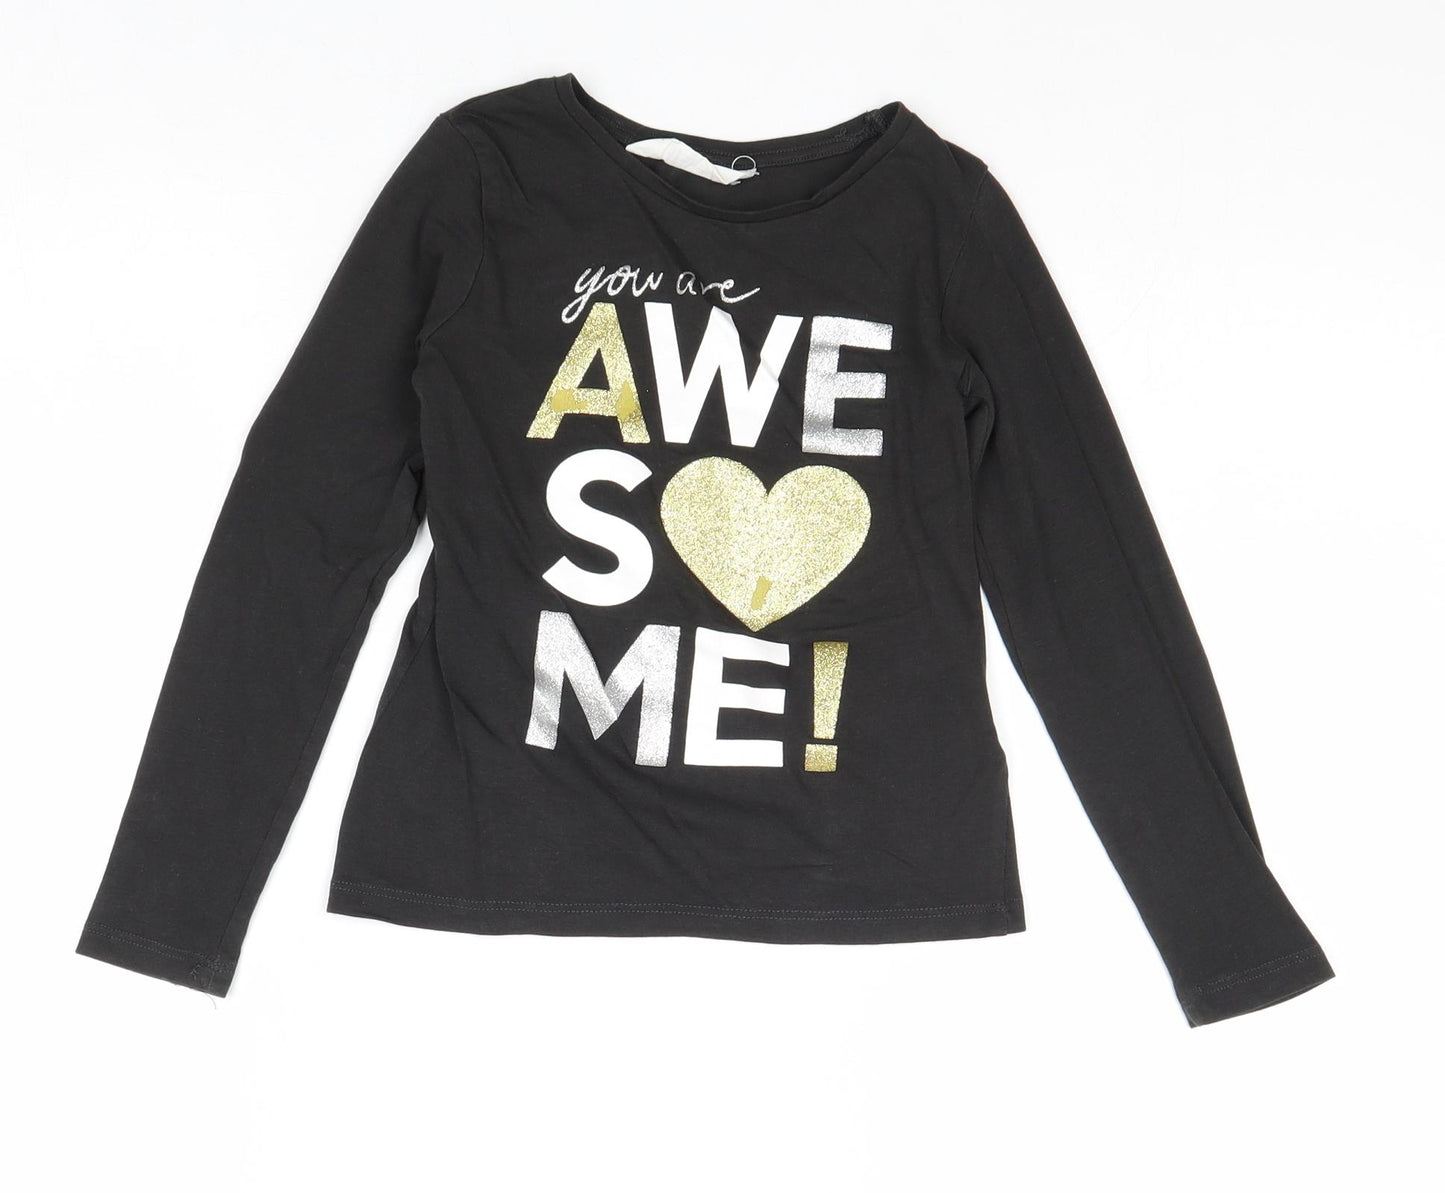 H&M Girls Black Cotton Pullover T-Shirt Size 5-6 Years Boat Neck Pullover - Awesome